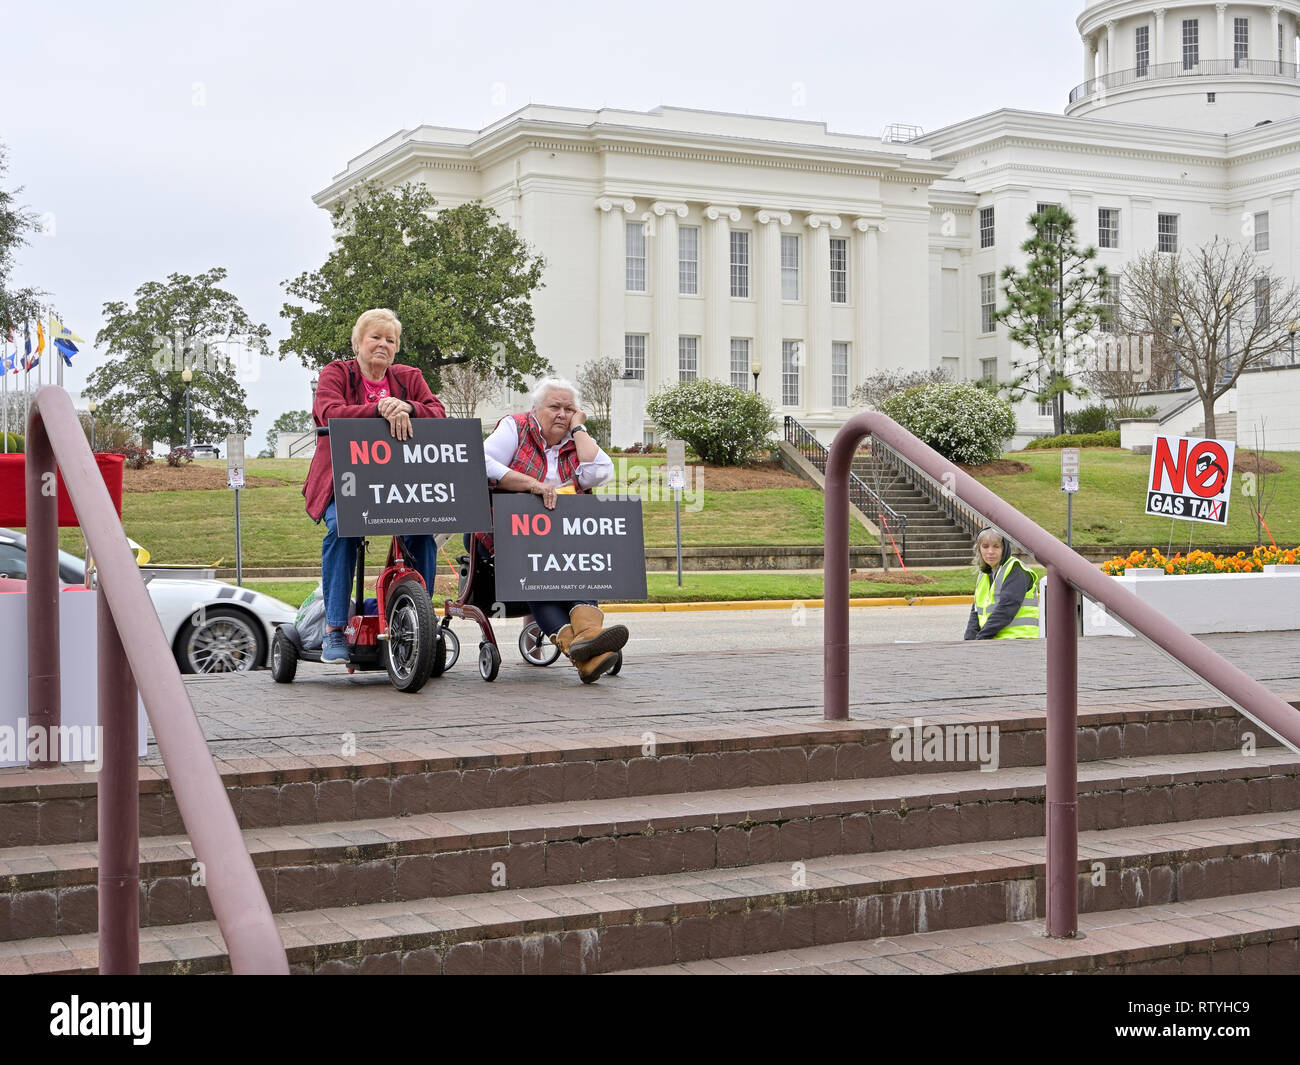 Two elderly or senior women in wheelchairs carrying signs for no more taxes listen to a speaker protesting higher higher gas taxes in Alabama, USA. Stock Photo